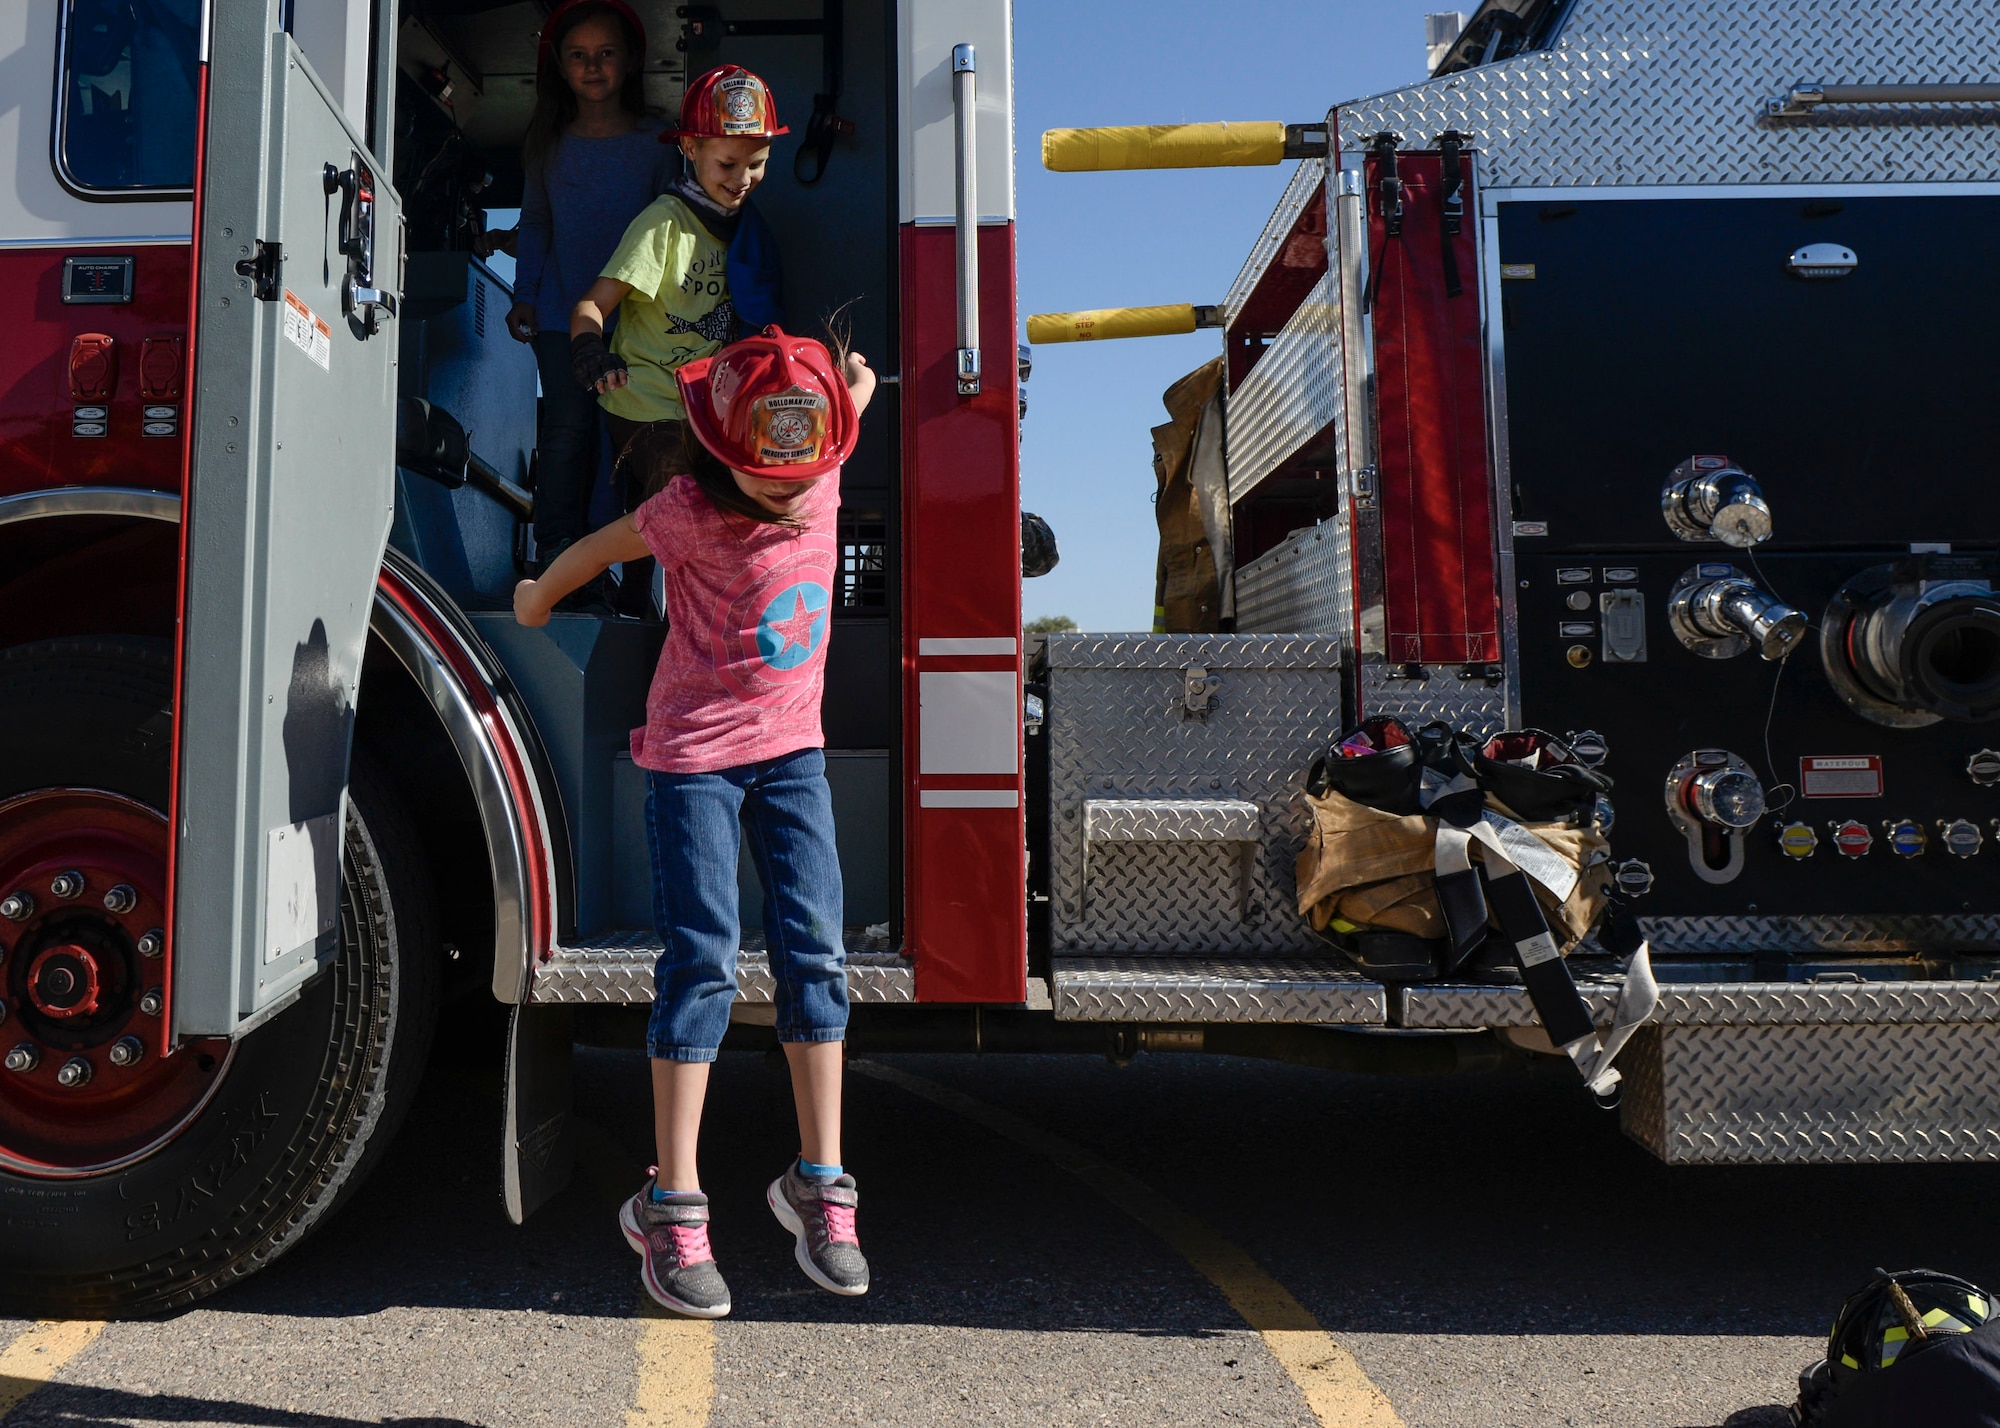 A child jumps from the back-end of a fire truck at Holloman Air Force Base’s elementary school as part of the base’s annual Fire Prevention Week, Oct. 11, 2016. Holloman AFB firefighters gifted each student an honorary plastic firefighter helmet and educated them on fire safety and prevention. (U.S. Air Force photo by Airman 1st Class Alexis P. Docherty)